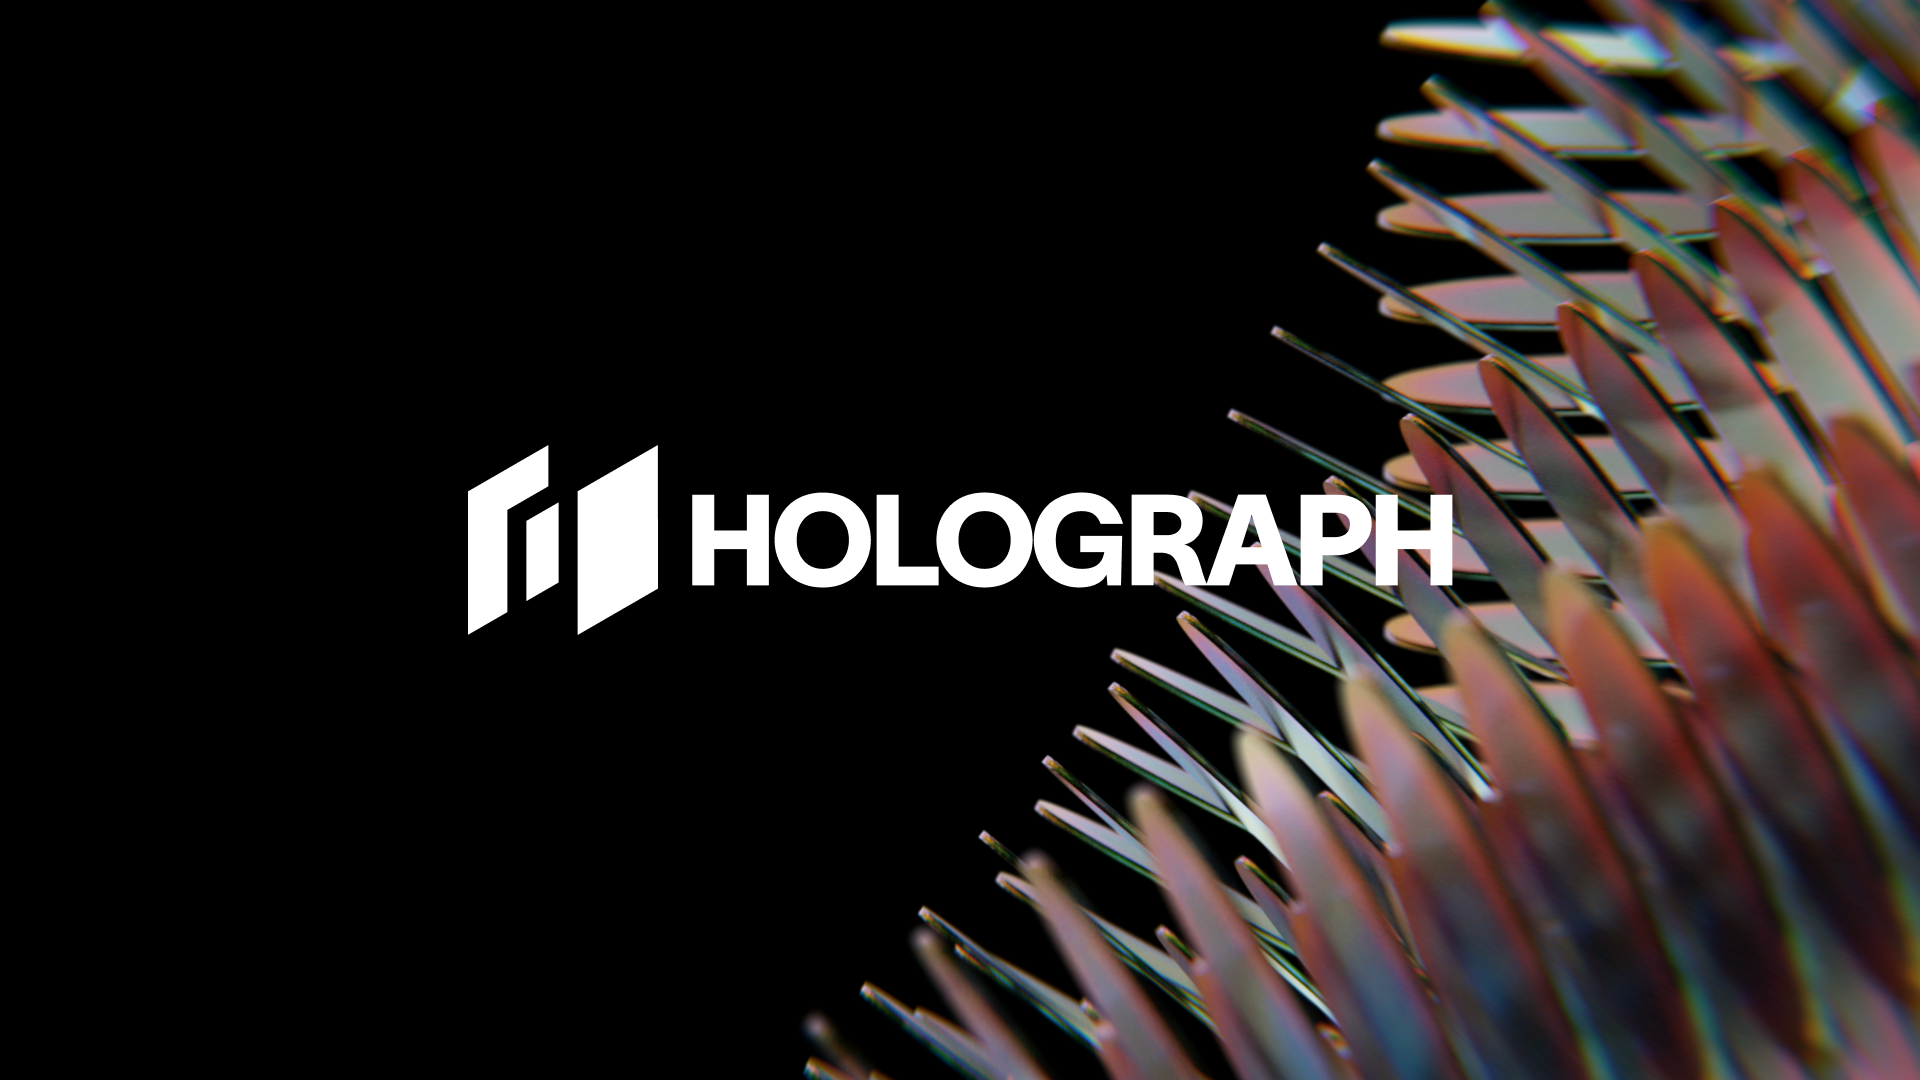 https://nftgames.net/wp-content/uploads/2023/05/Holograph-brings-the-CryptoPunk-NFT-project-to-the-meme-industry.png